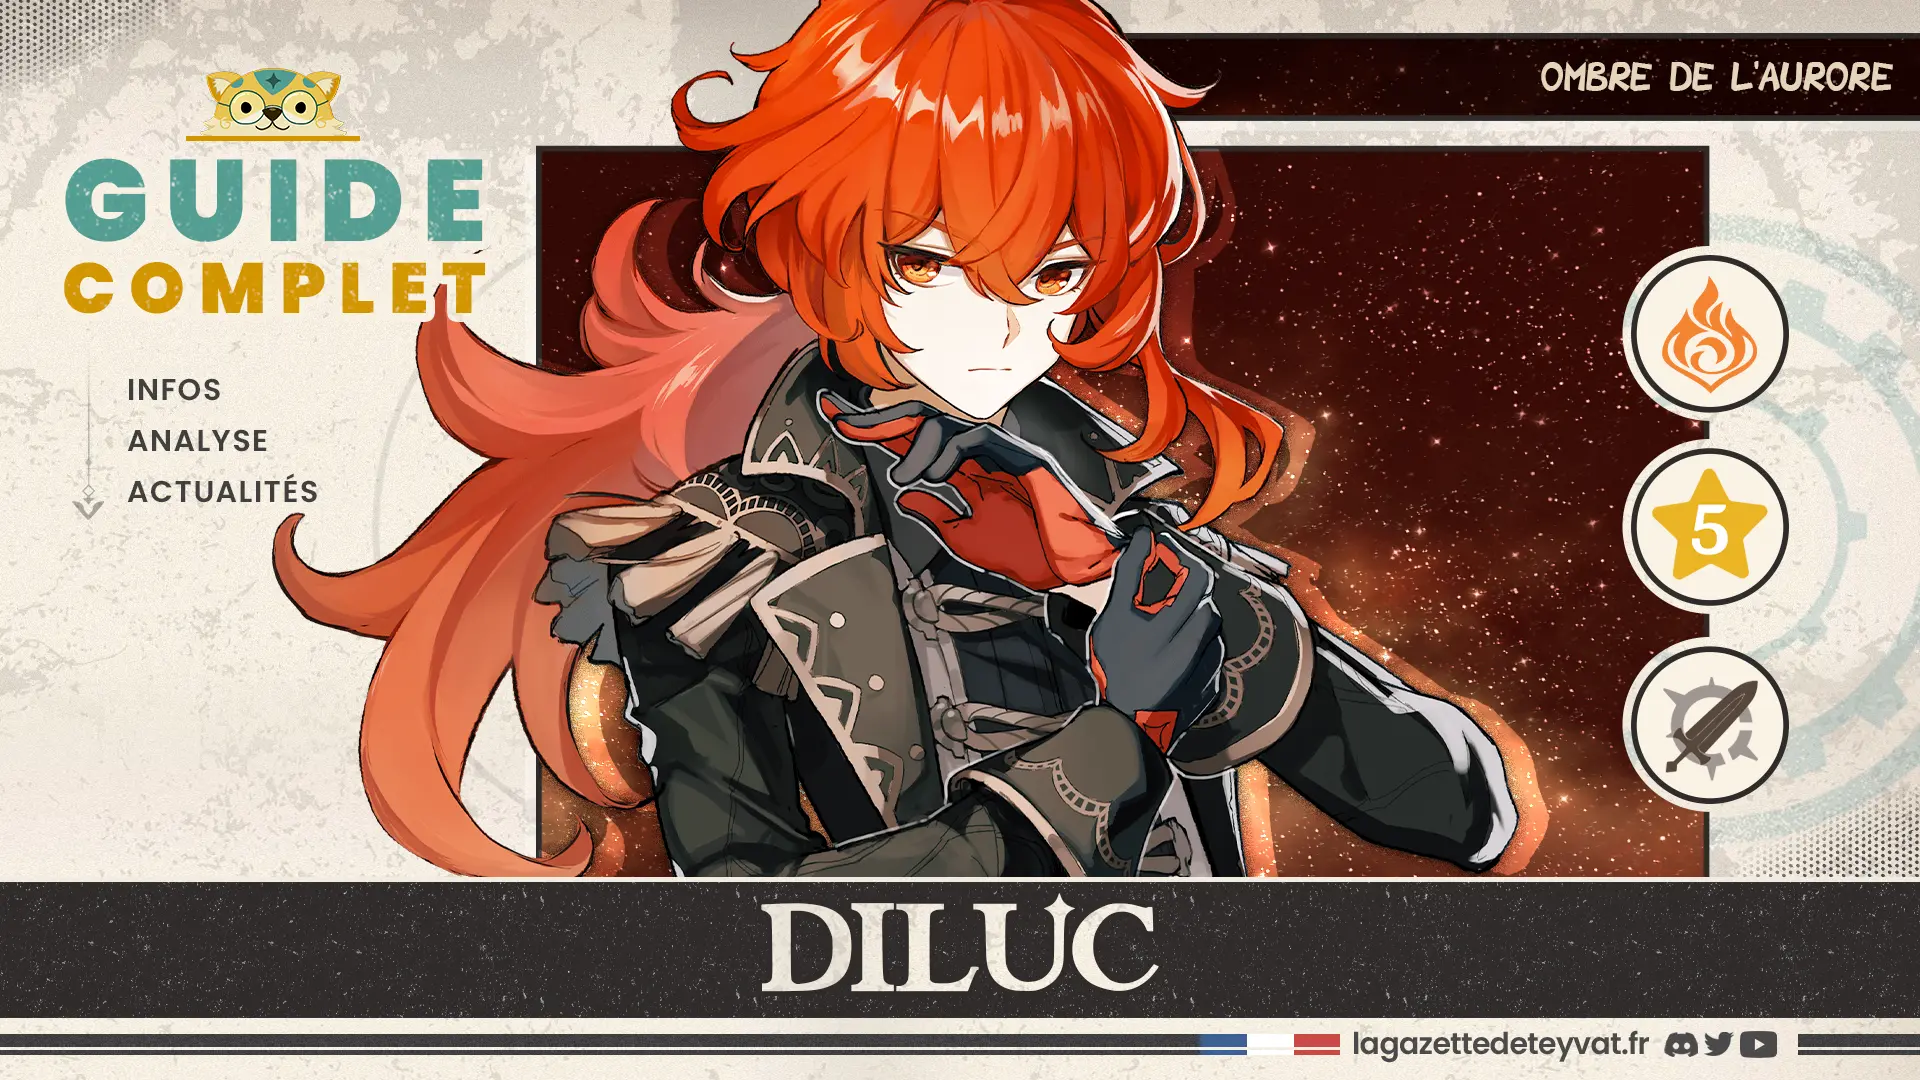 Diluc Genshin Impact, guide complet, farm, build, synergies, rotations